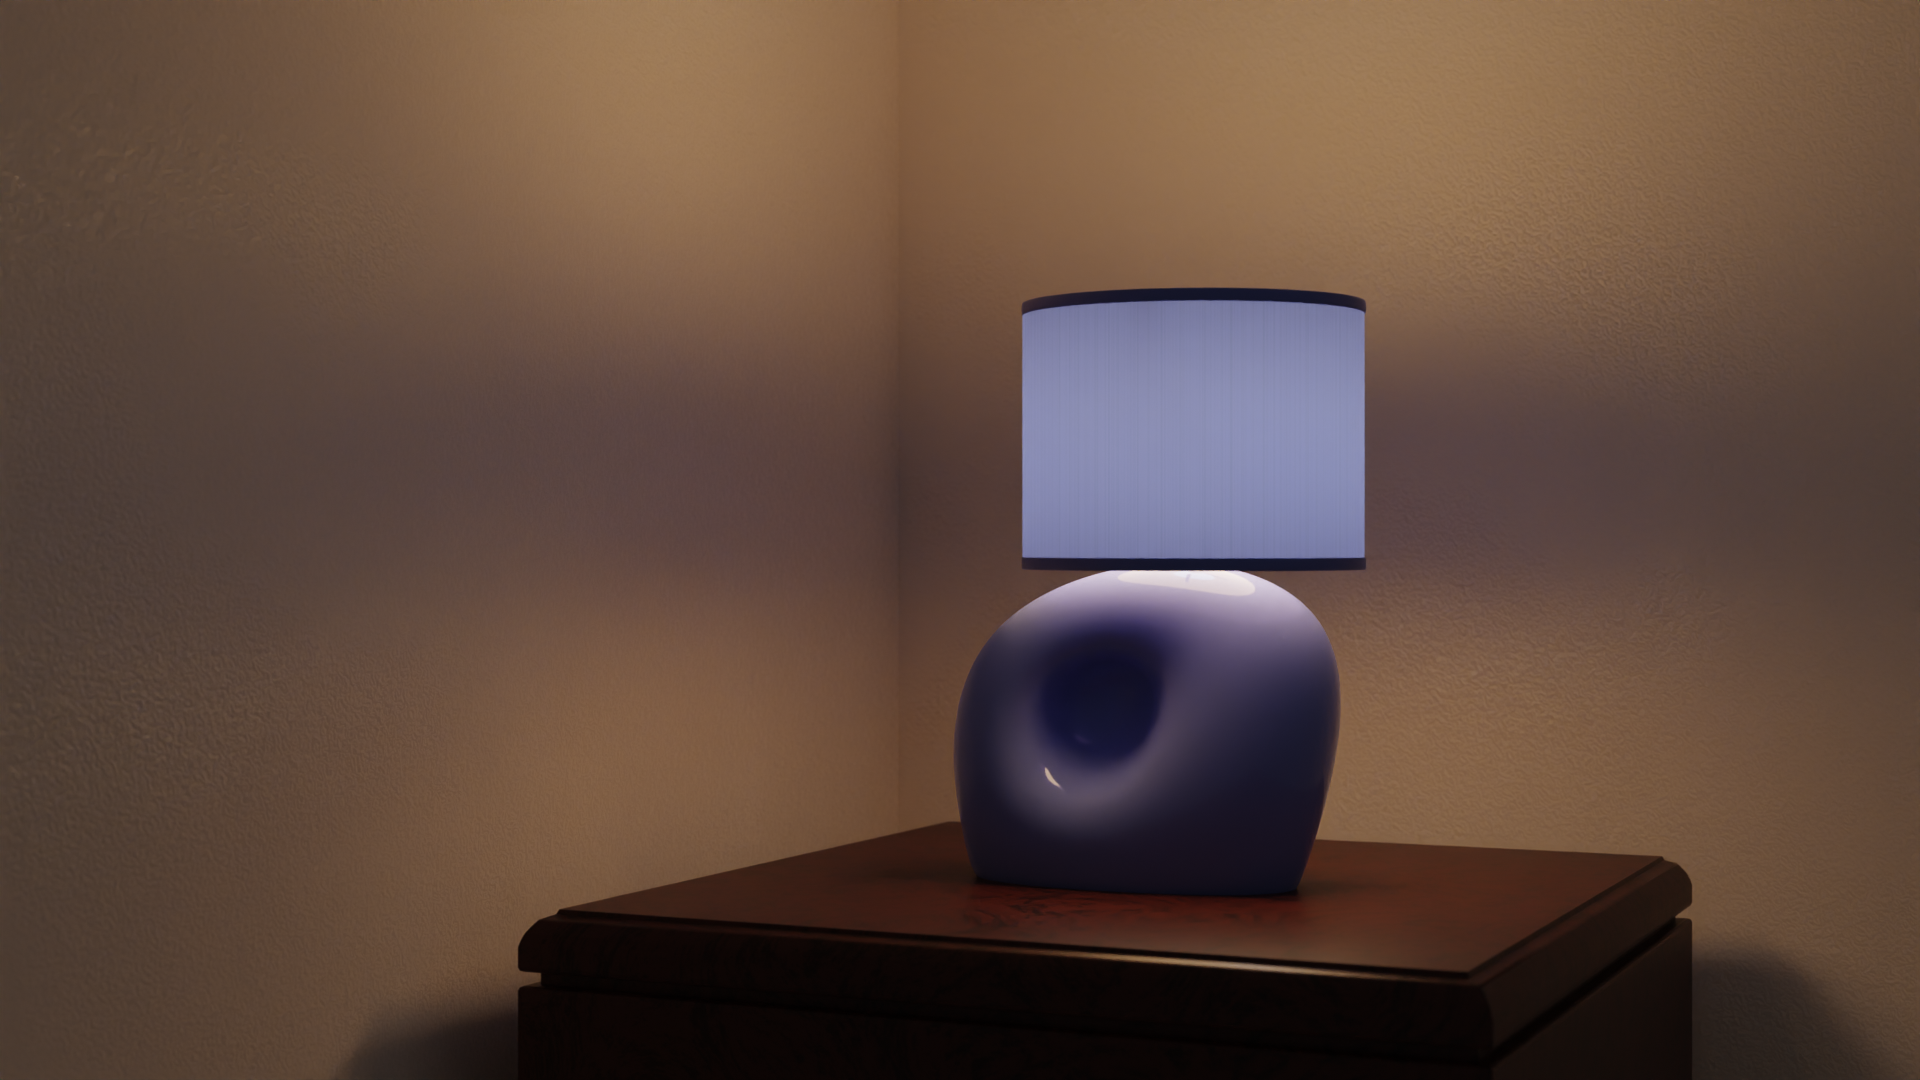 Modern, spherical lamp with derpession in the middle. Lamp base is purple with a light purple lamp shade. It sits on a wooden bedside table.